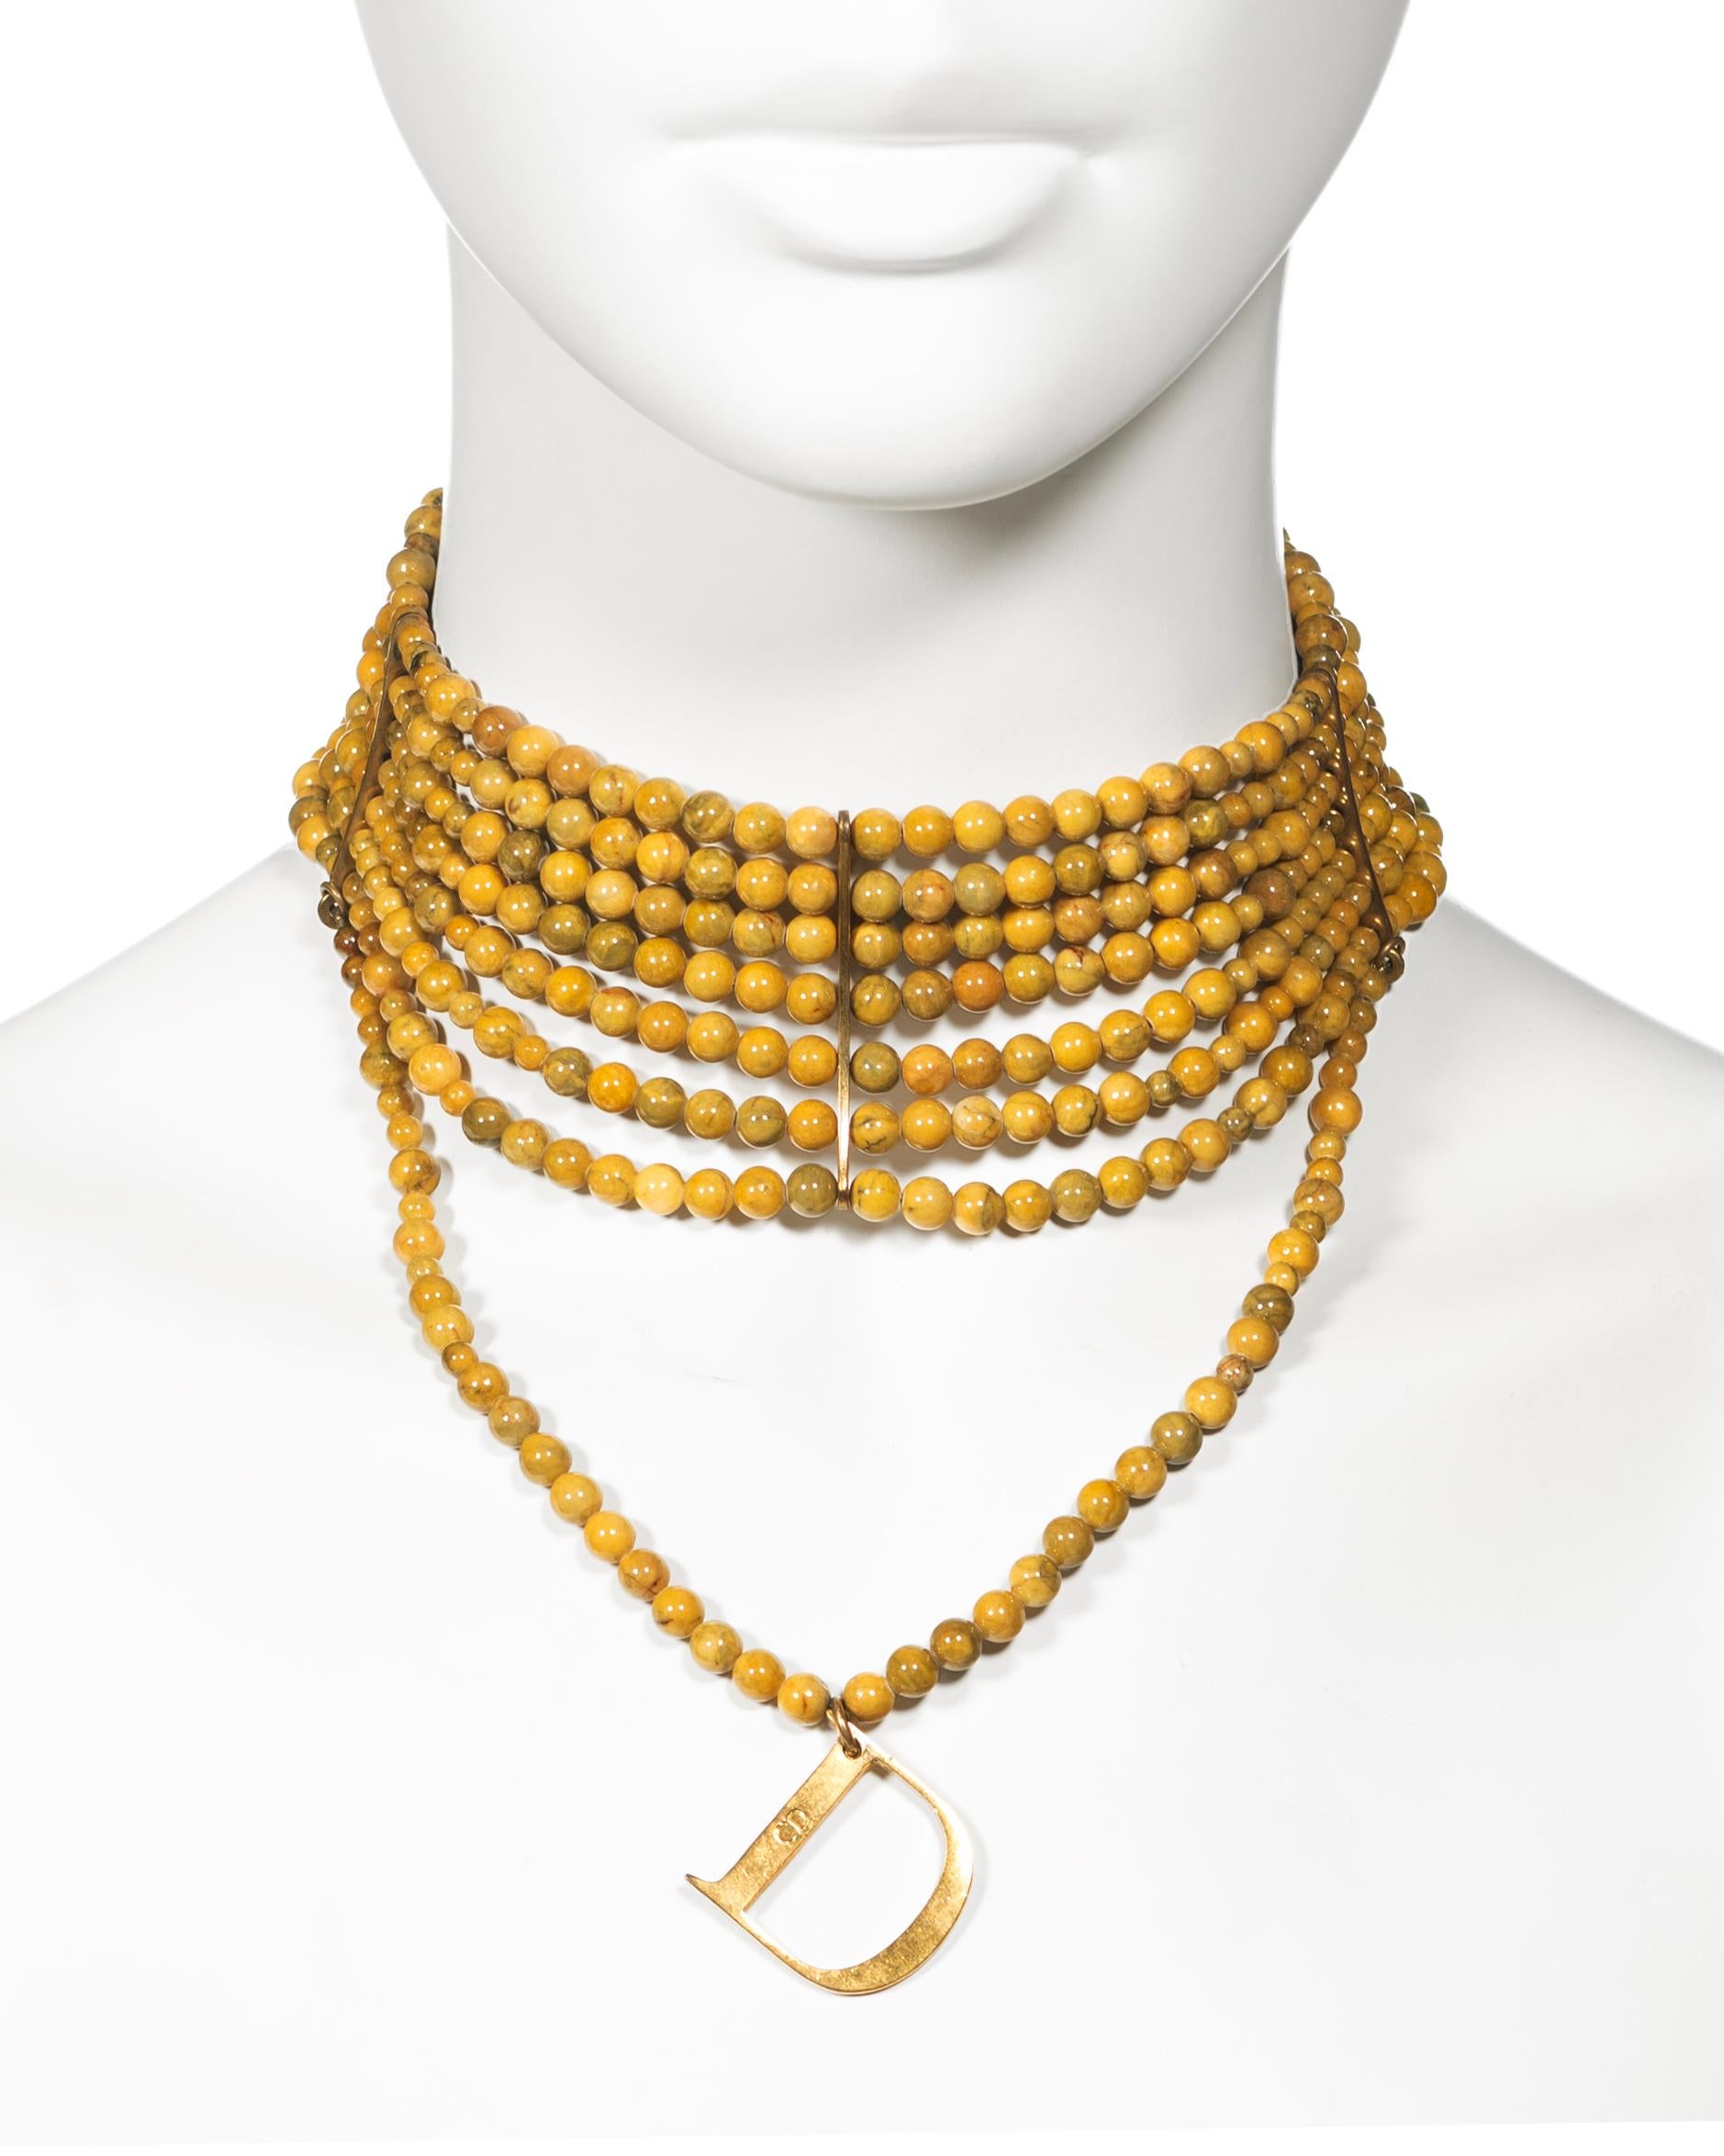 Christian Dior by John Galliano Marbled Glass Bead Choker Necklace, c. 1998 For Sale 1